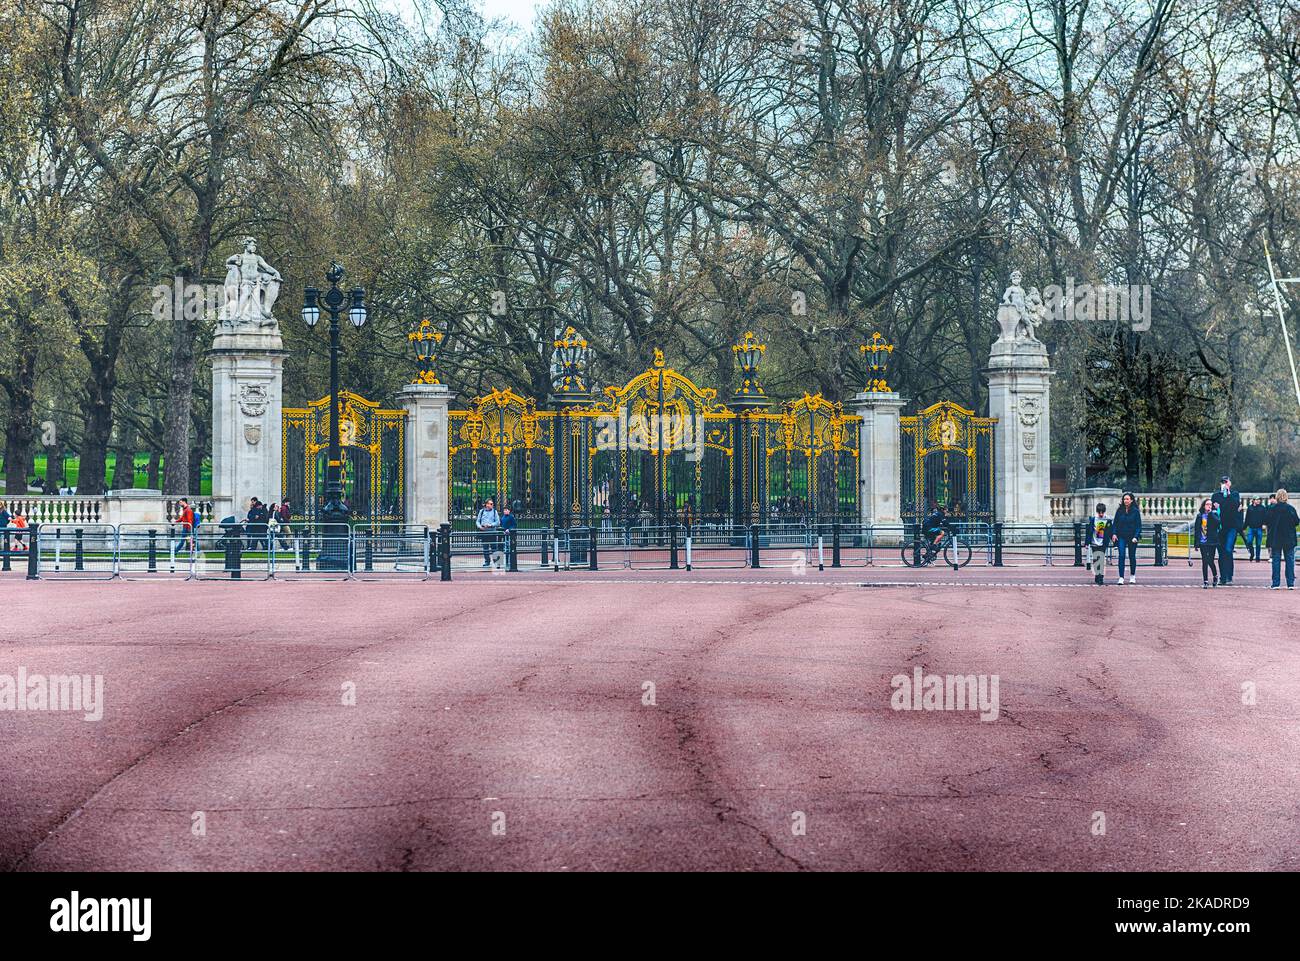 LONDON - APRIL 11, 2022: Gate with gilded ornaments in Buckingham Palace, one of the main tourist attractions in London, England, UK Stock Photo